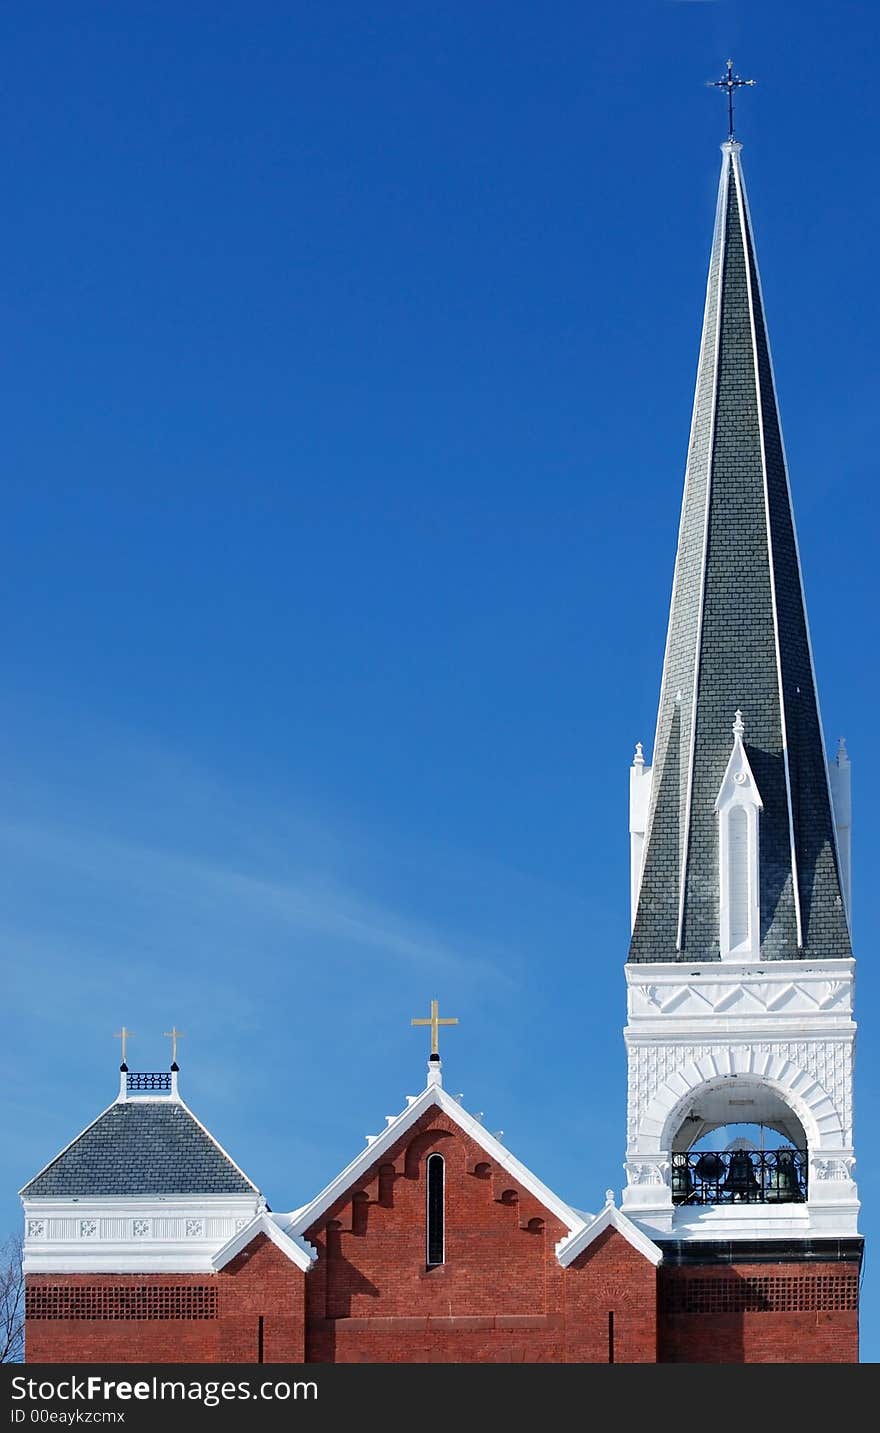 Church steeple and crosses against a blue sky